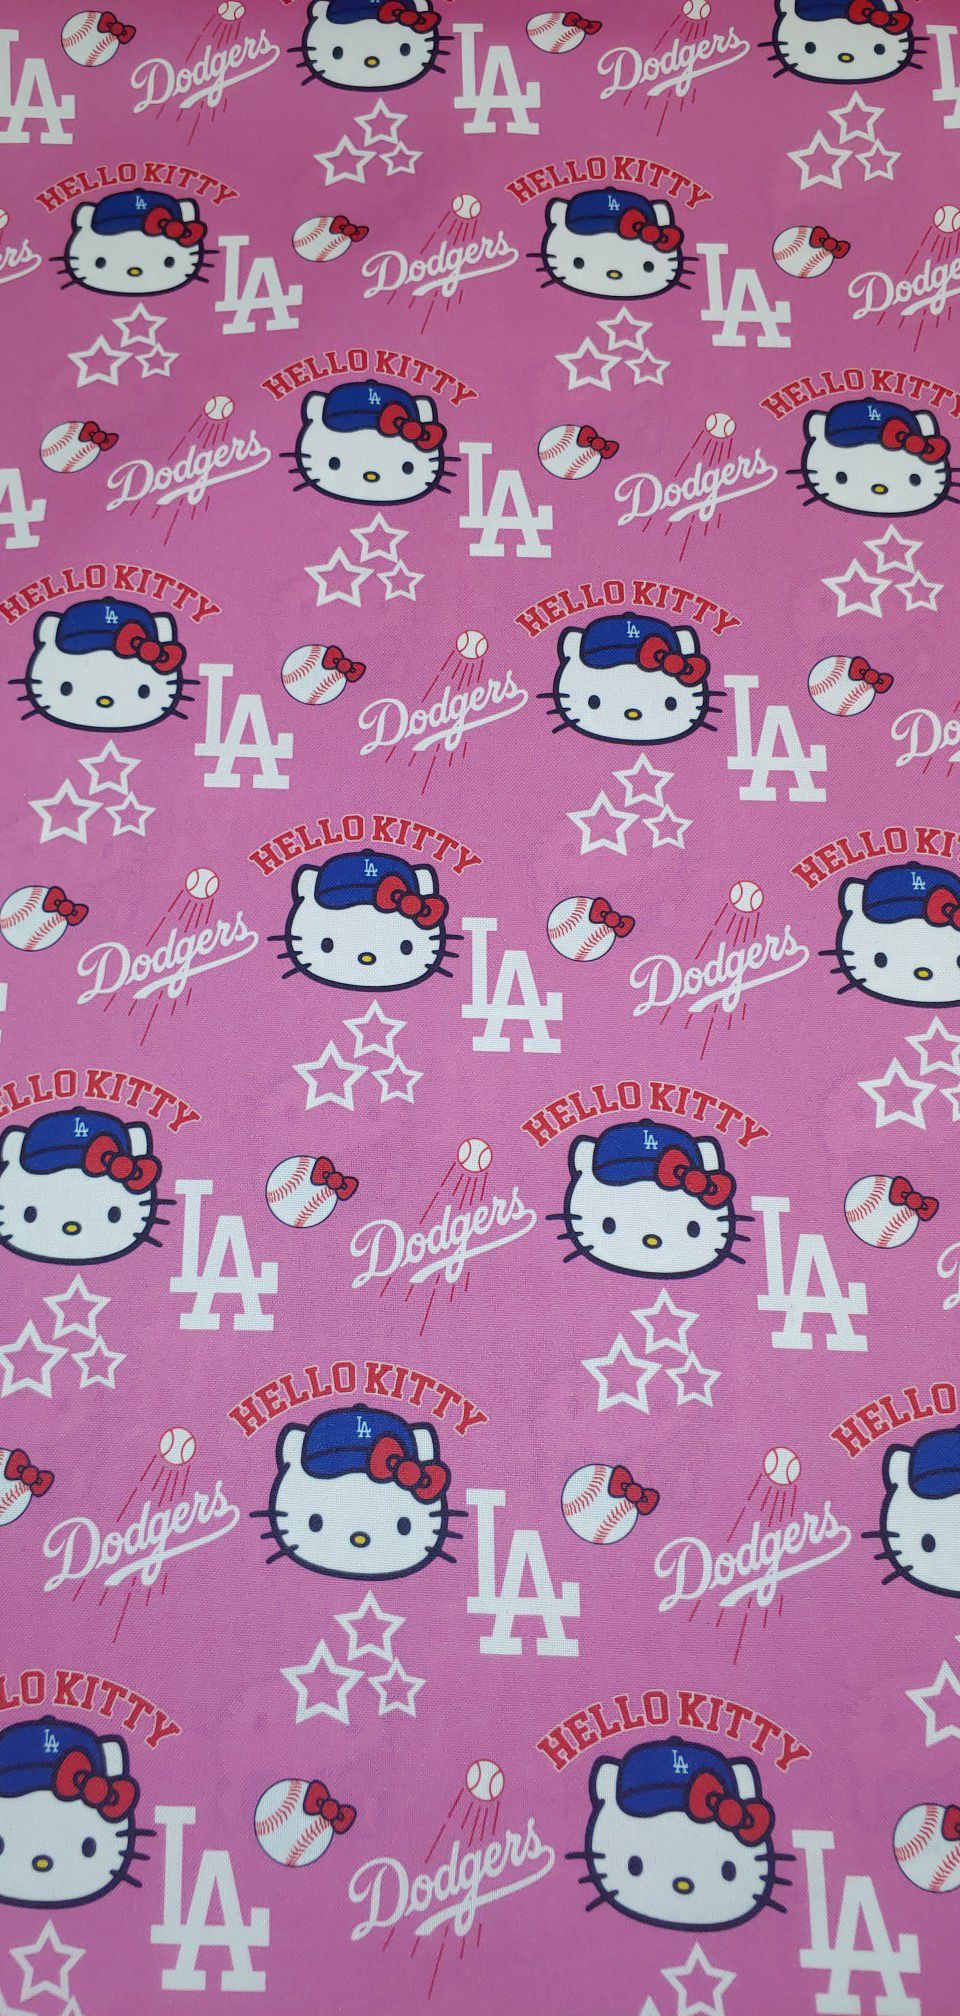 HELLO KITTY DODGERS FABRIC for Sale in City of Industry, CA